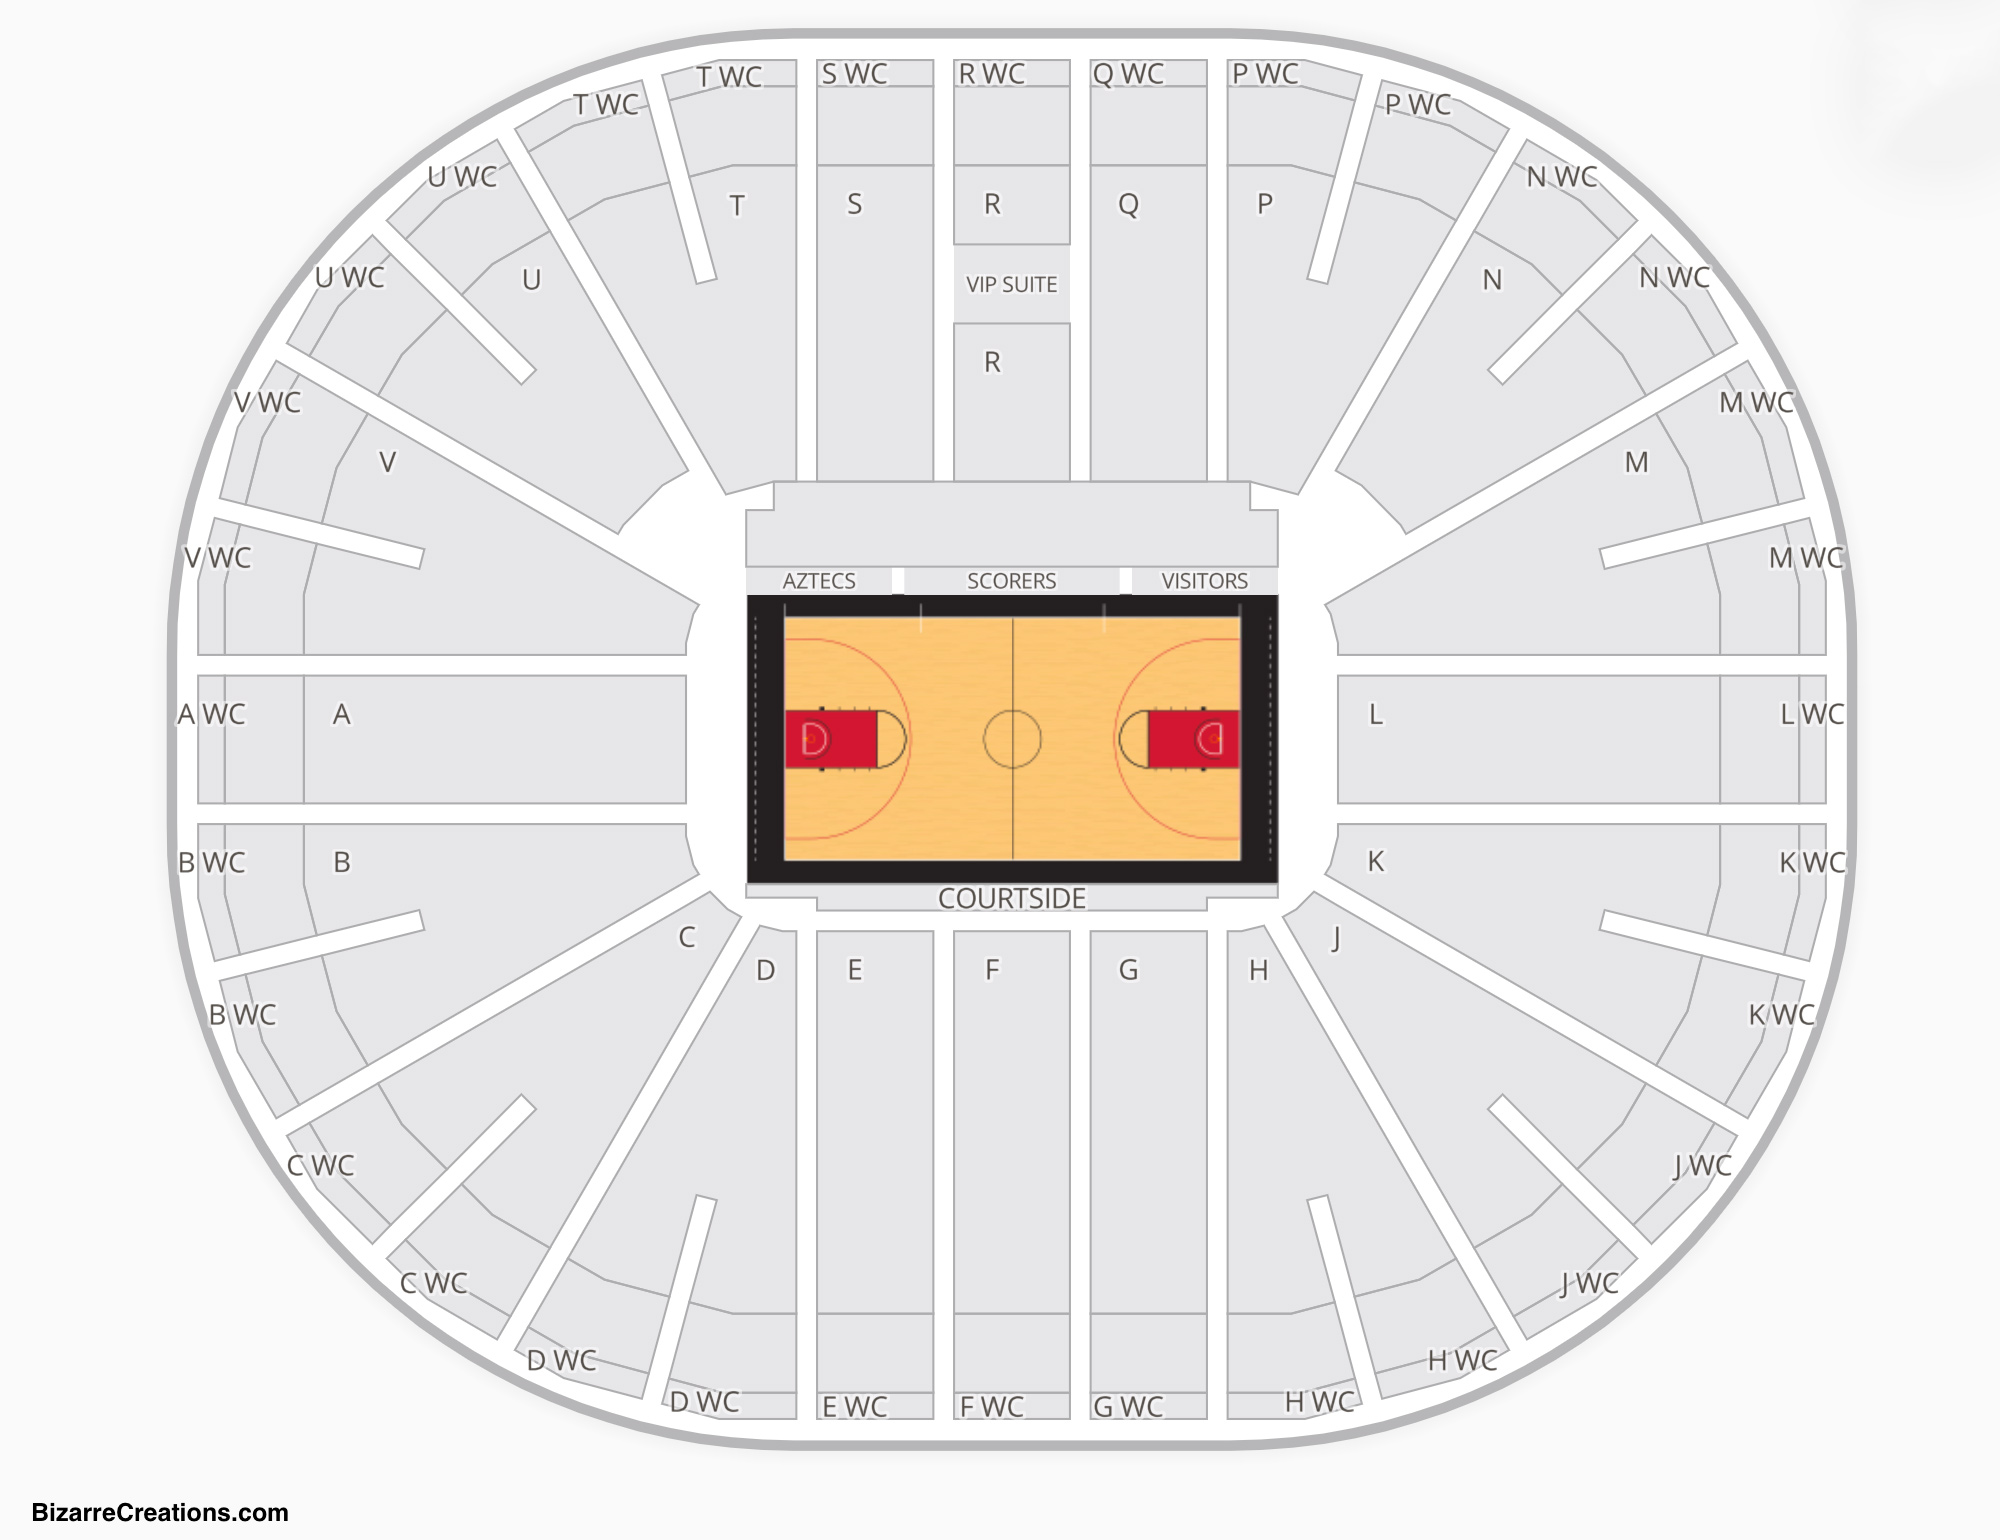 Viejas Arena Seating Chart | Seating Charts & Tickets